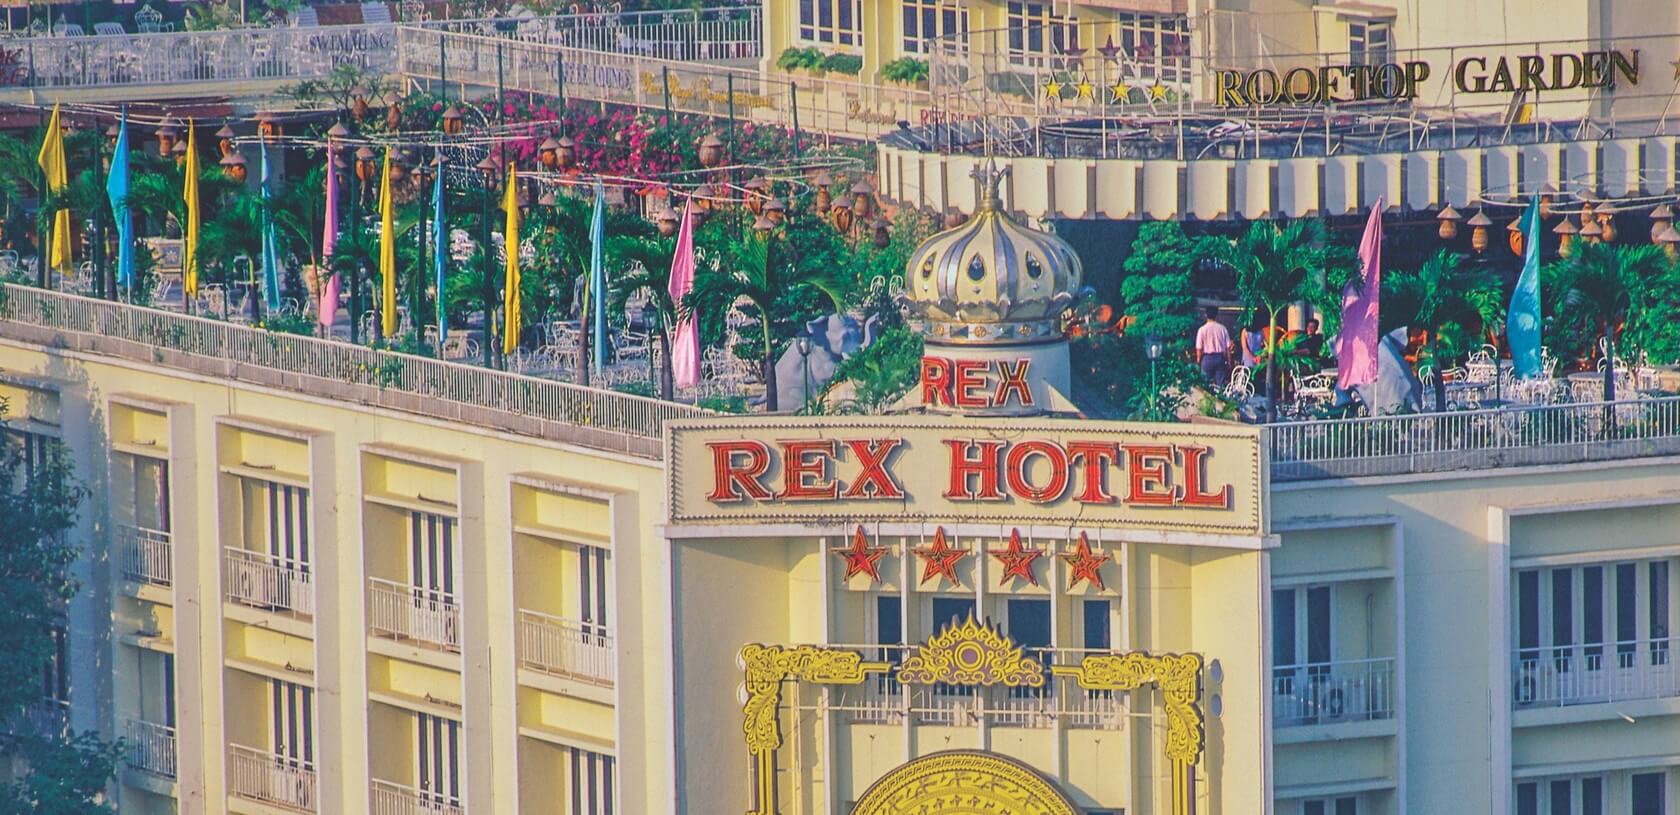 A picture of the facade of the Rex Hotel in Saigon